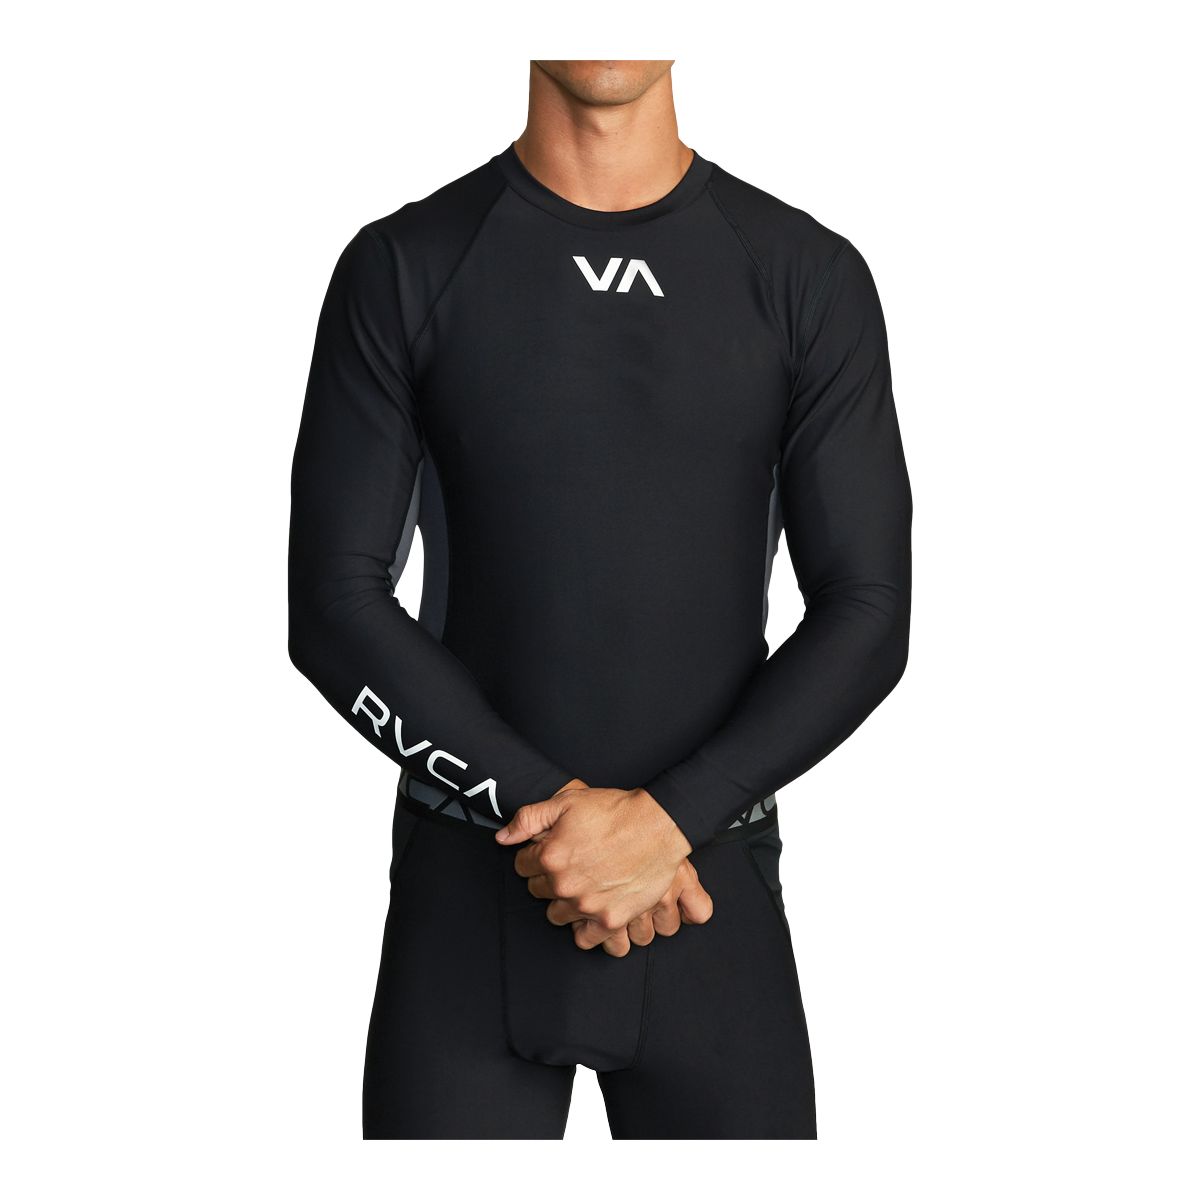 Image of Rvca Sport Men's Compression Long Sleeve Shirt